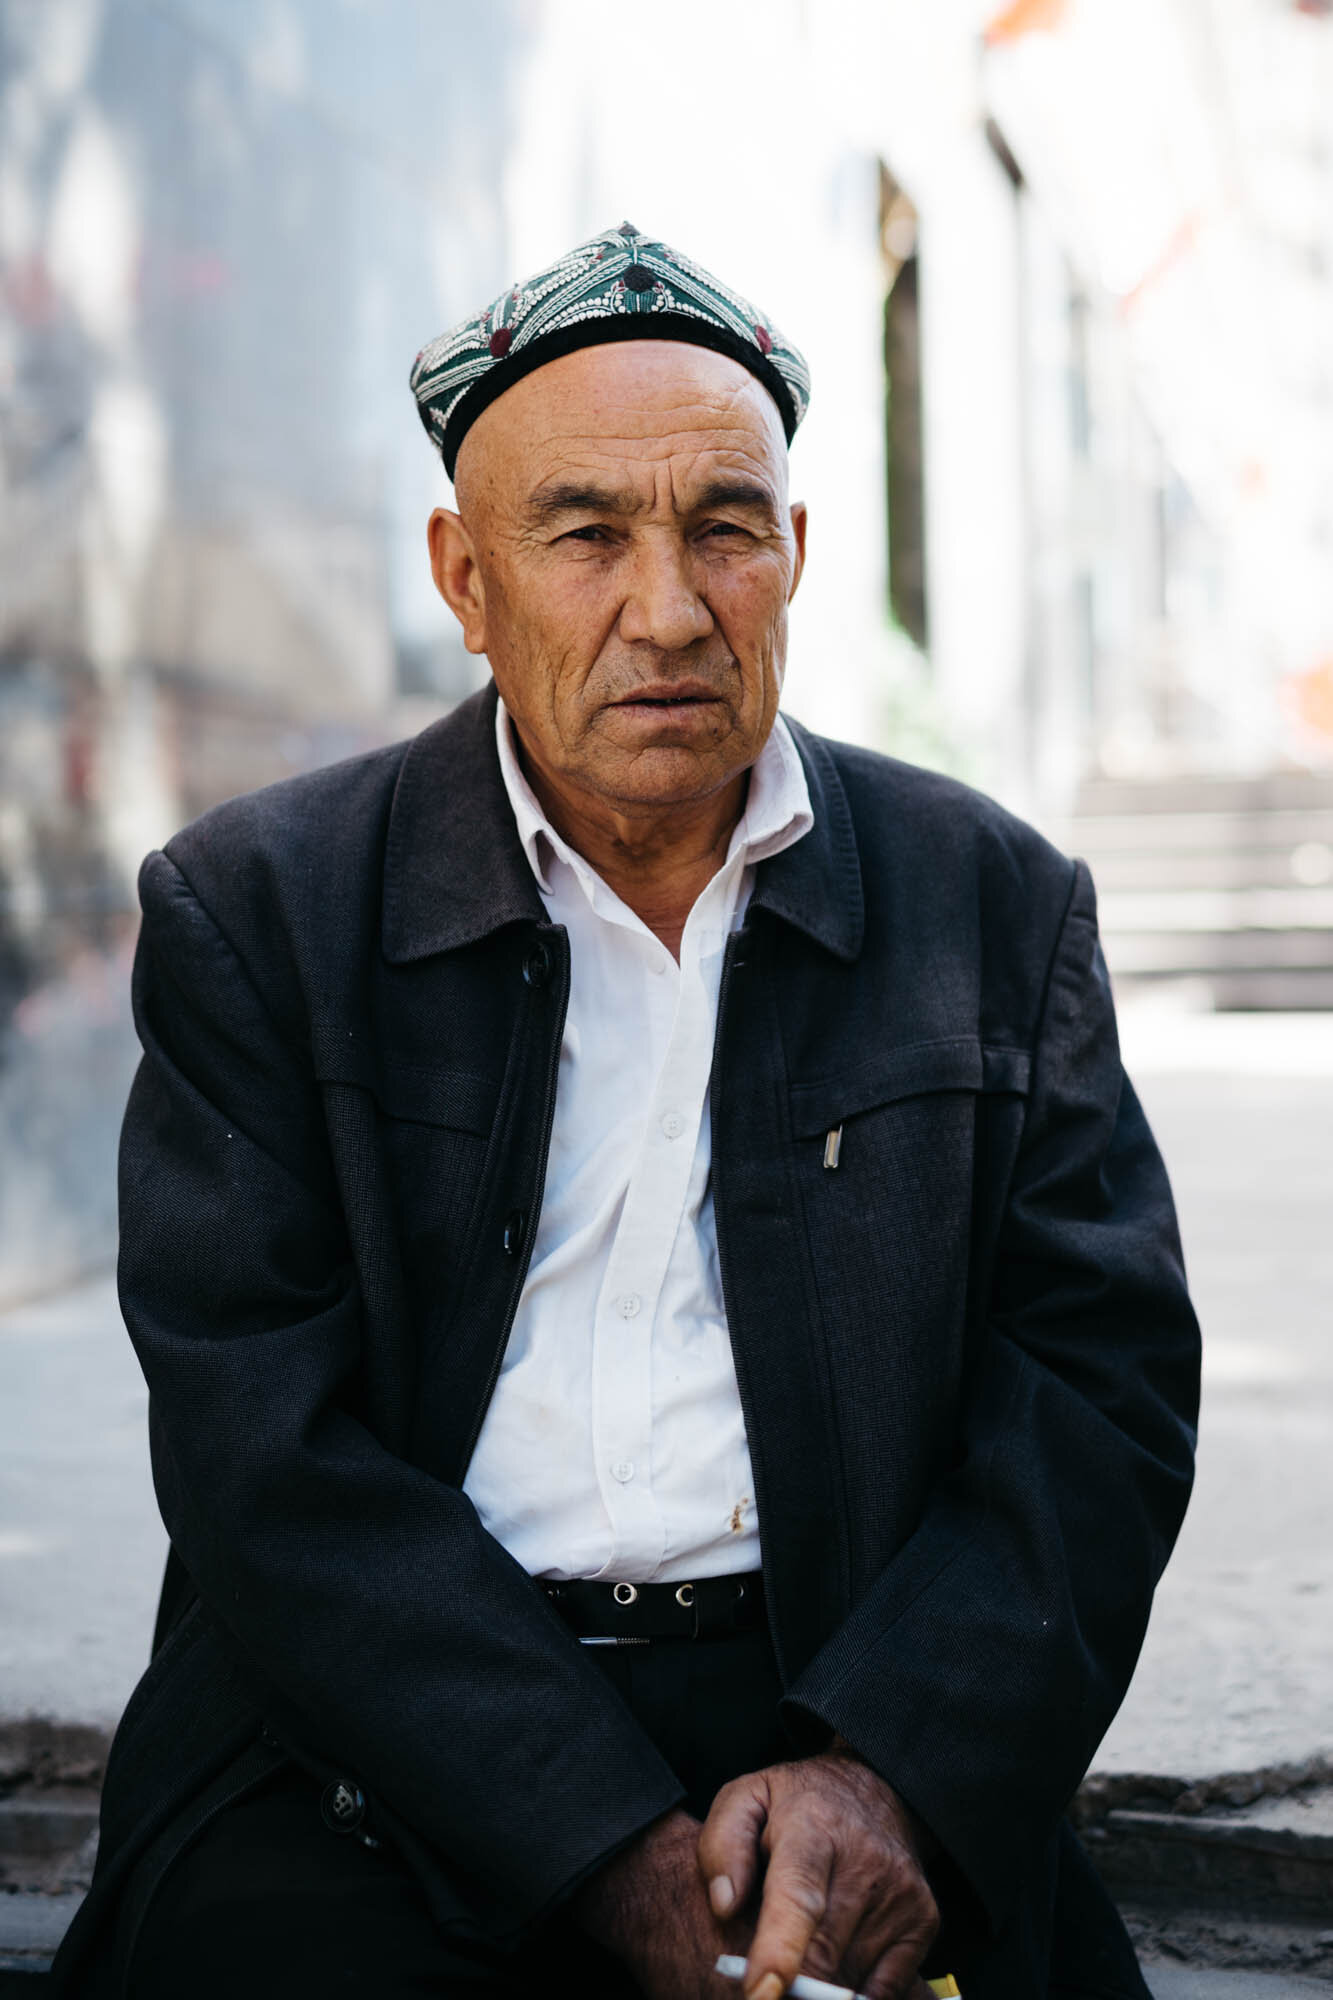  An Uyghur man wearing a traditional hat 